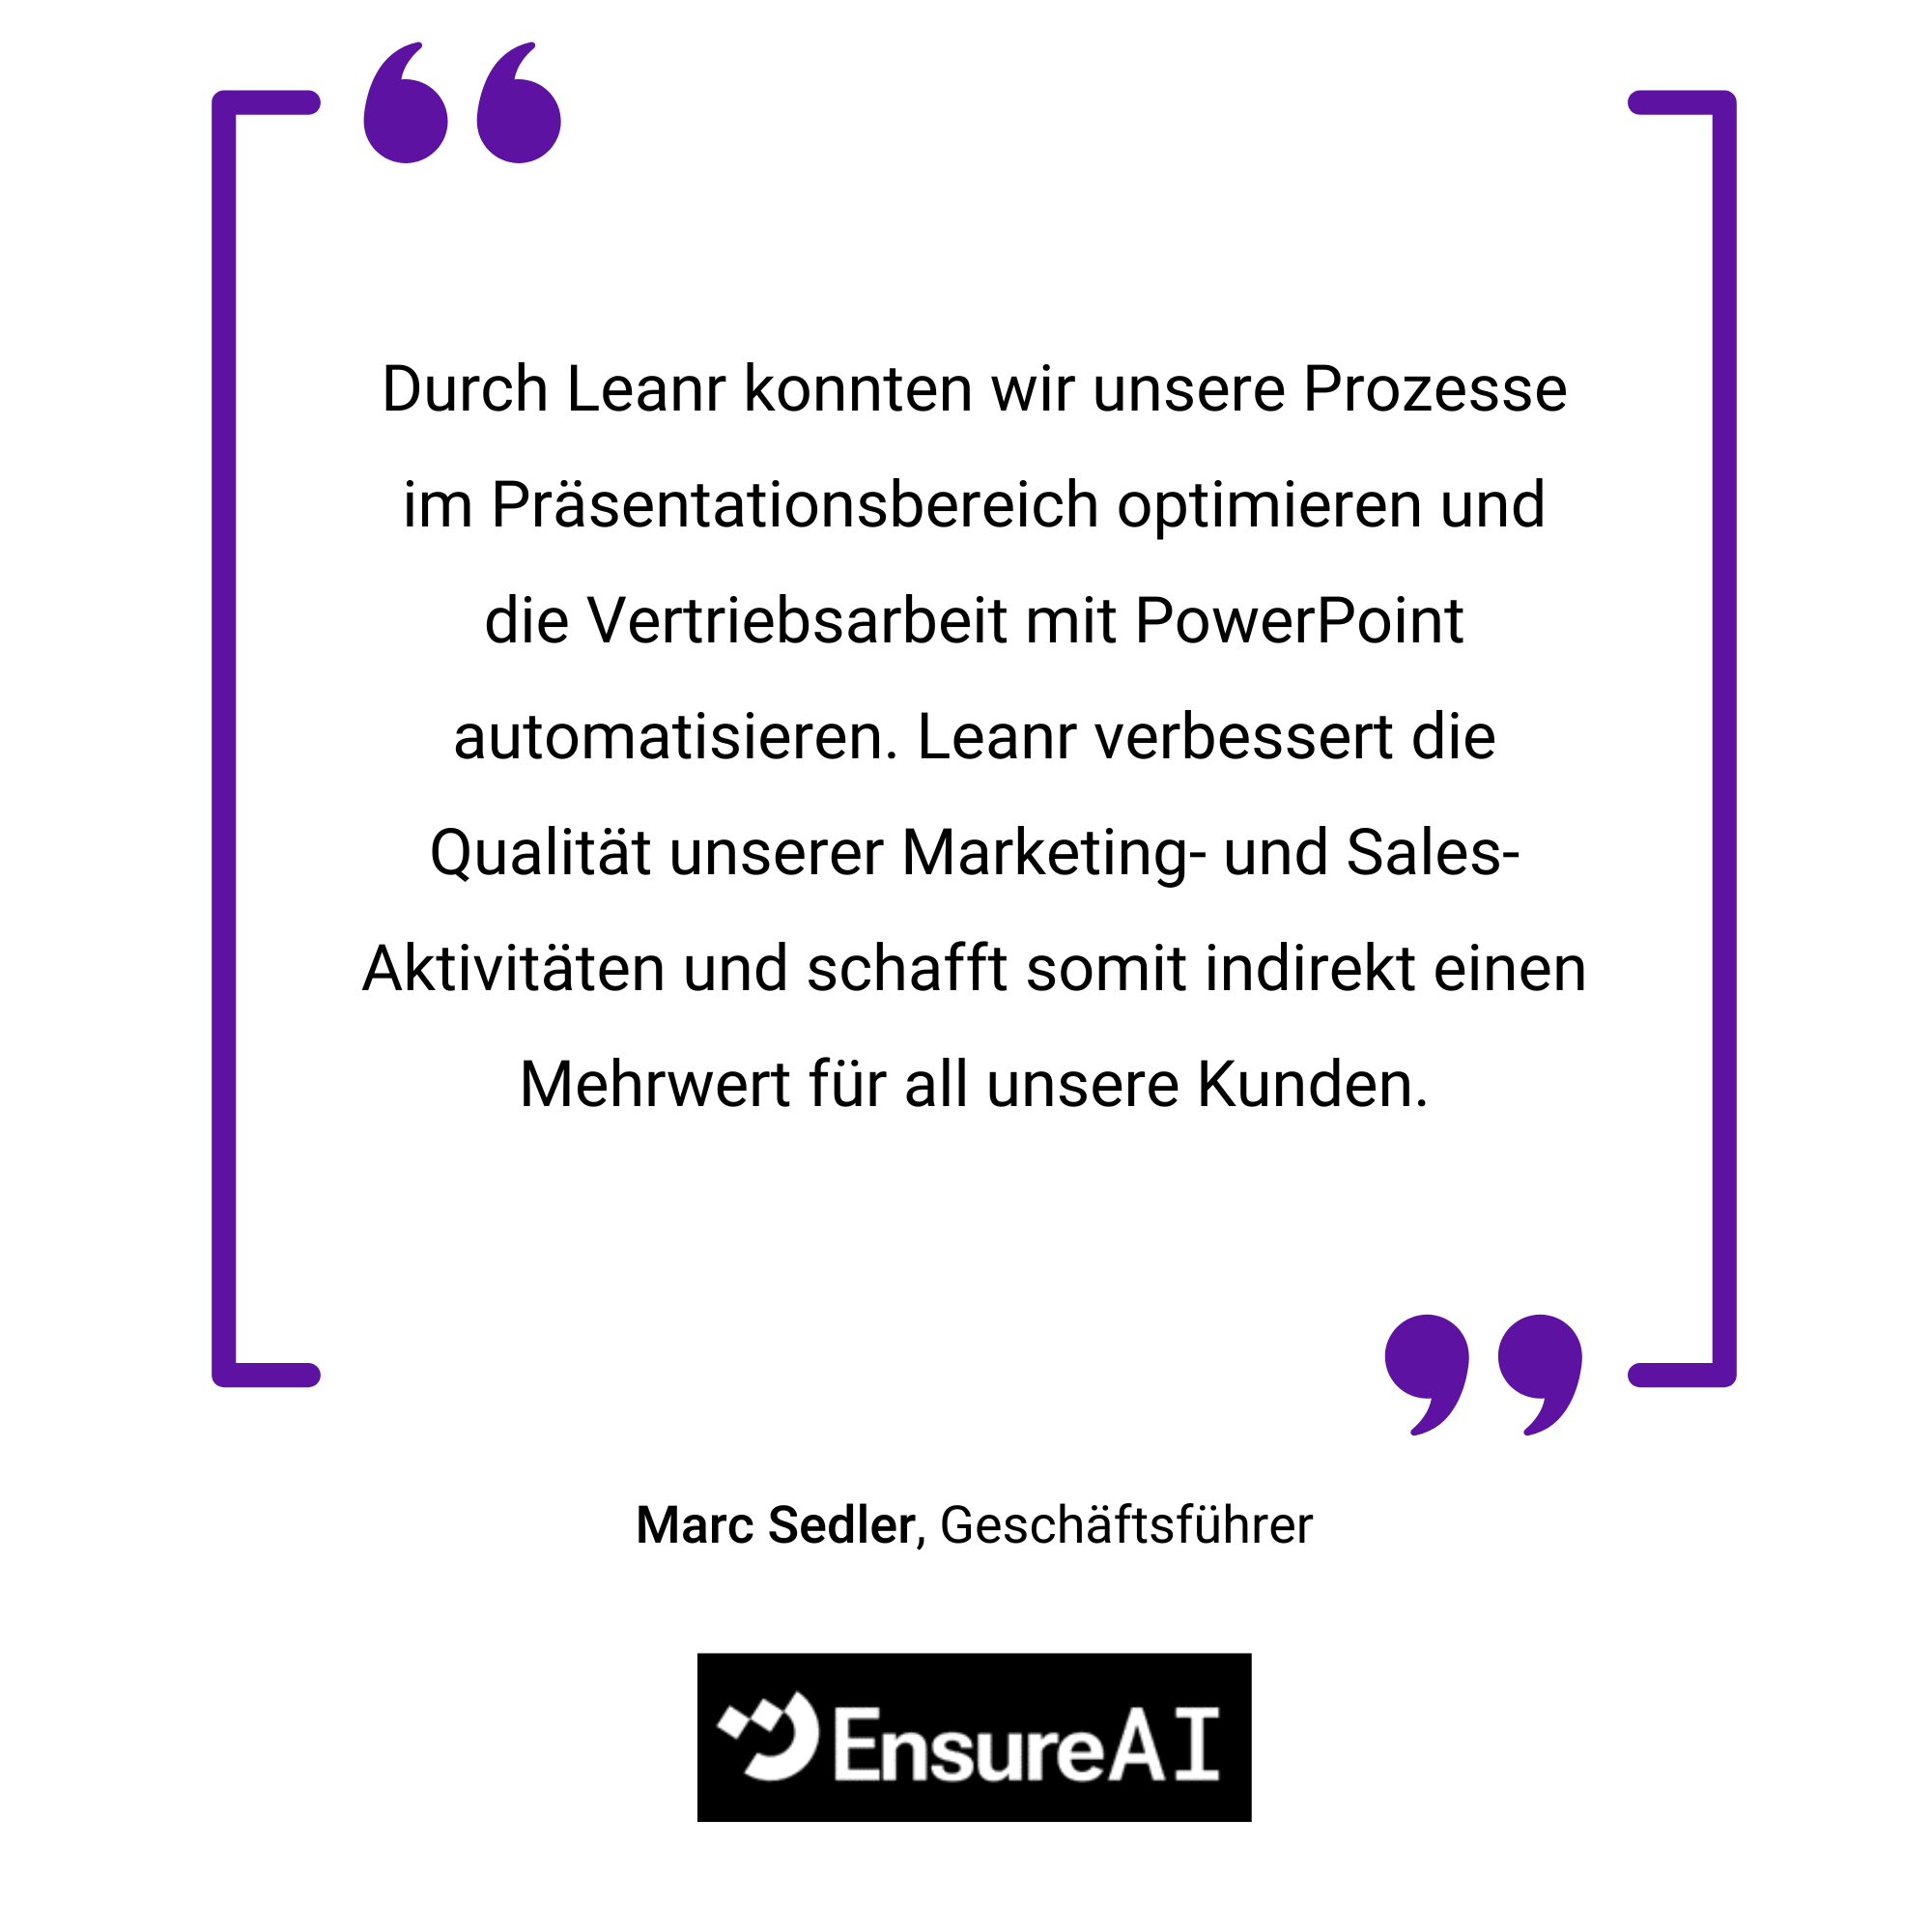 Graphic of a quote in german about optimizing processes and automating with powerpoint, attributed to marc sedler from ensureai, displayed in a purple border with the company's logo at the bottom.